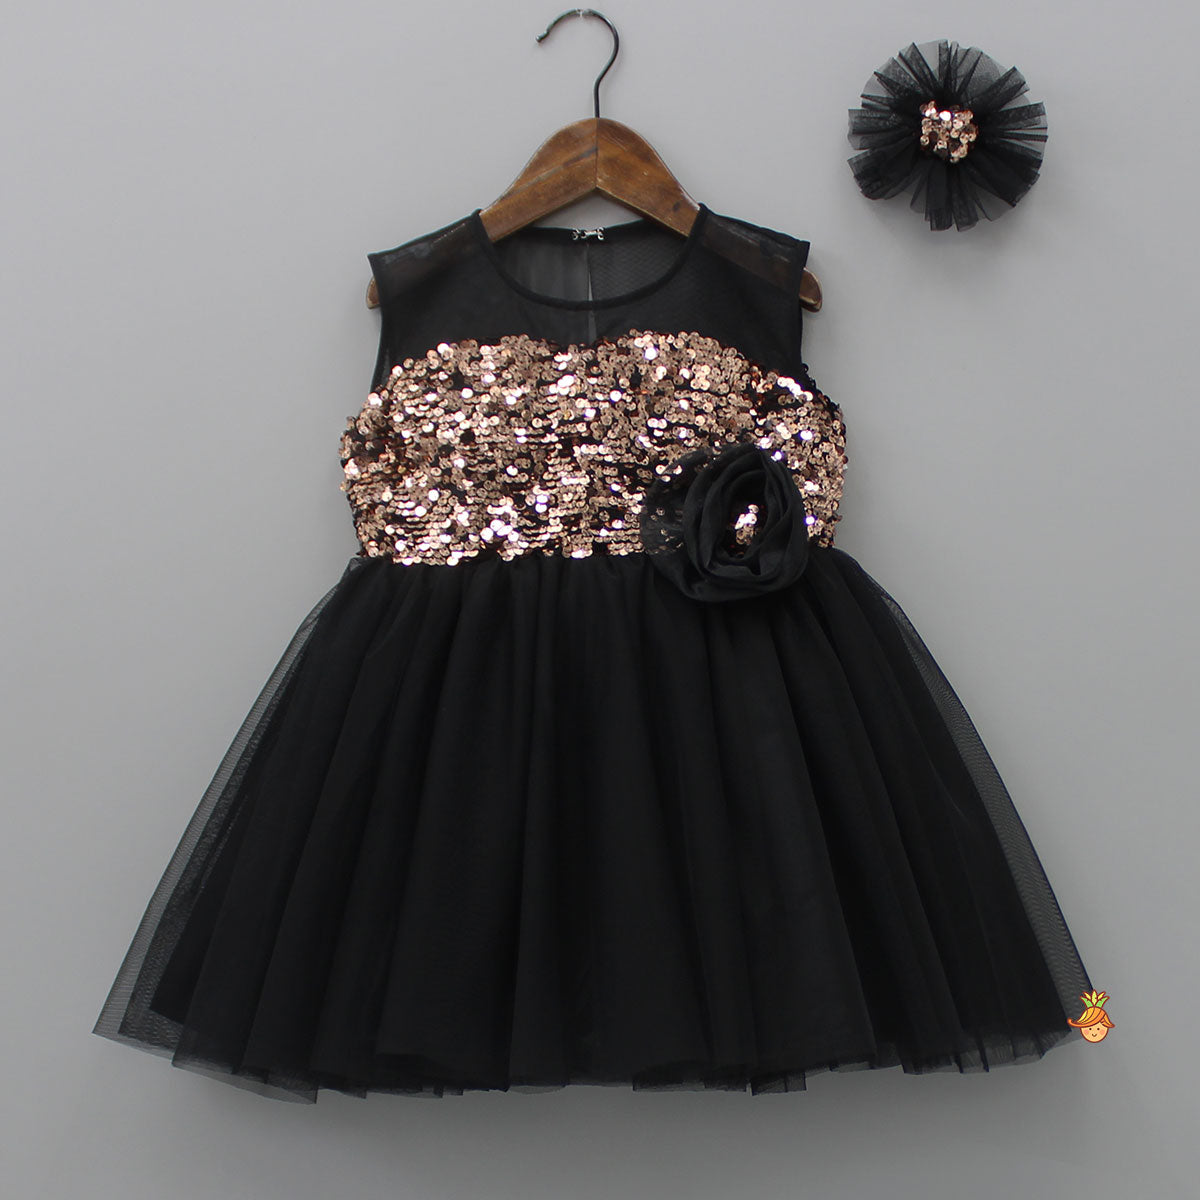 Glamorous Sequins Black Net Dress With Matching Hair Clip